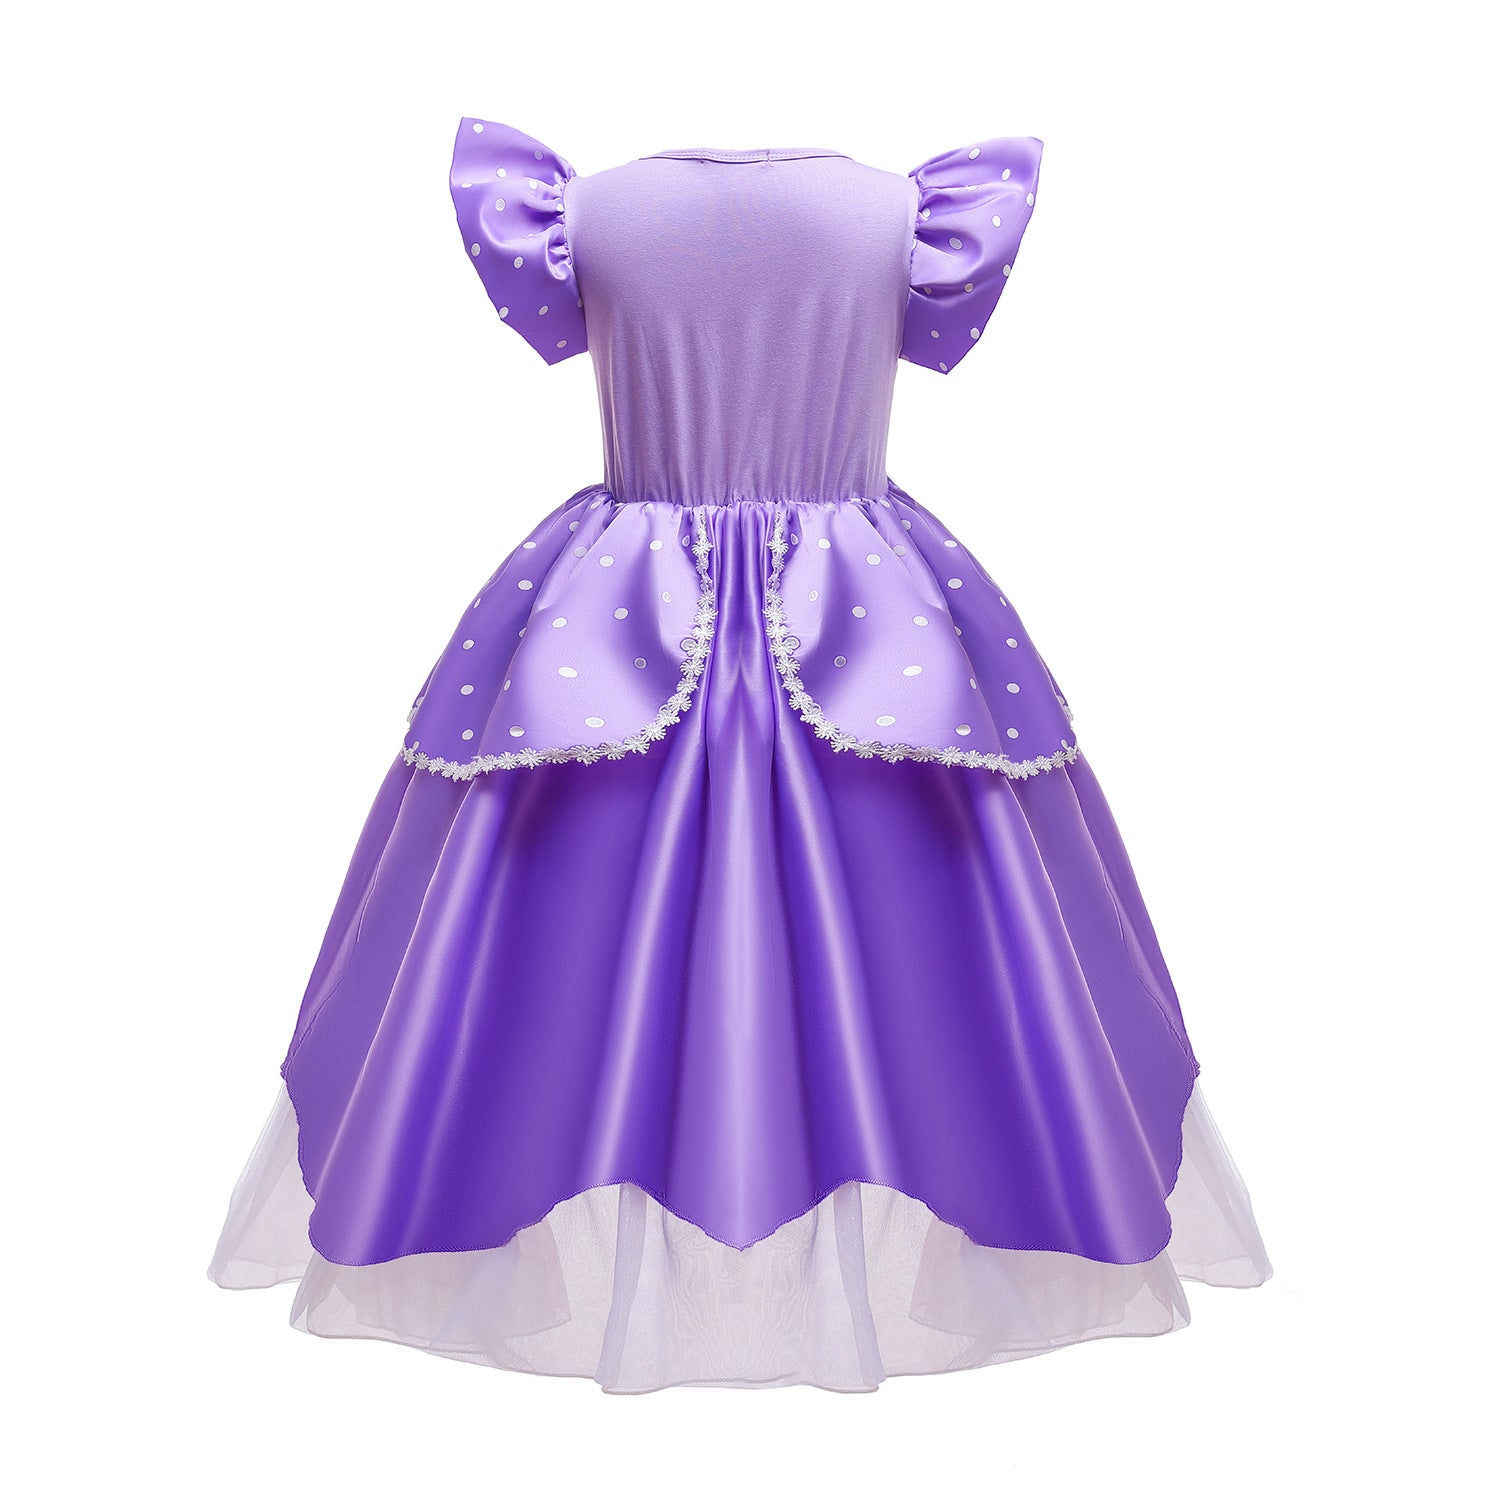 Flower Girls Dresses New Princess Sofia the First Costume Dresses For Cosplay Party Holiday Wedding